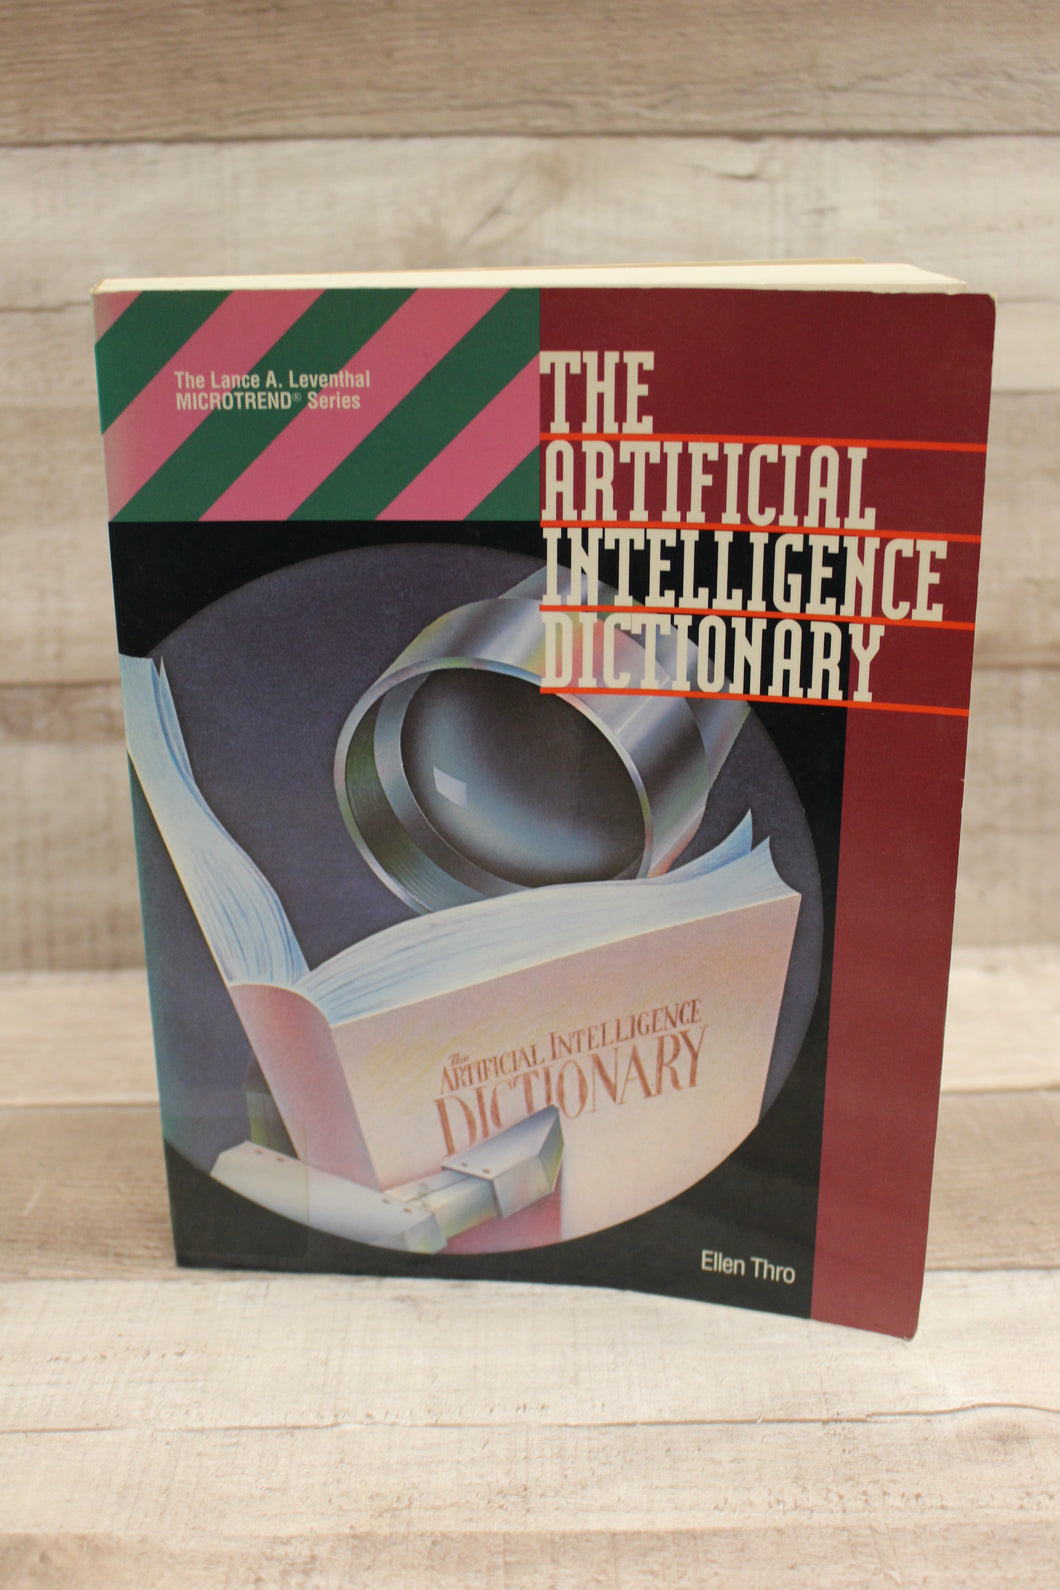 The Artificial Intelligence Dictionary by Ellen Thro